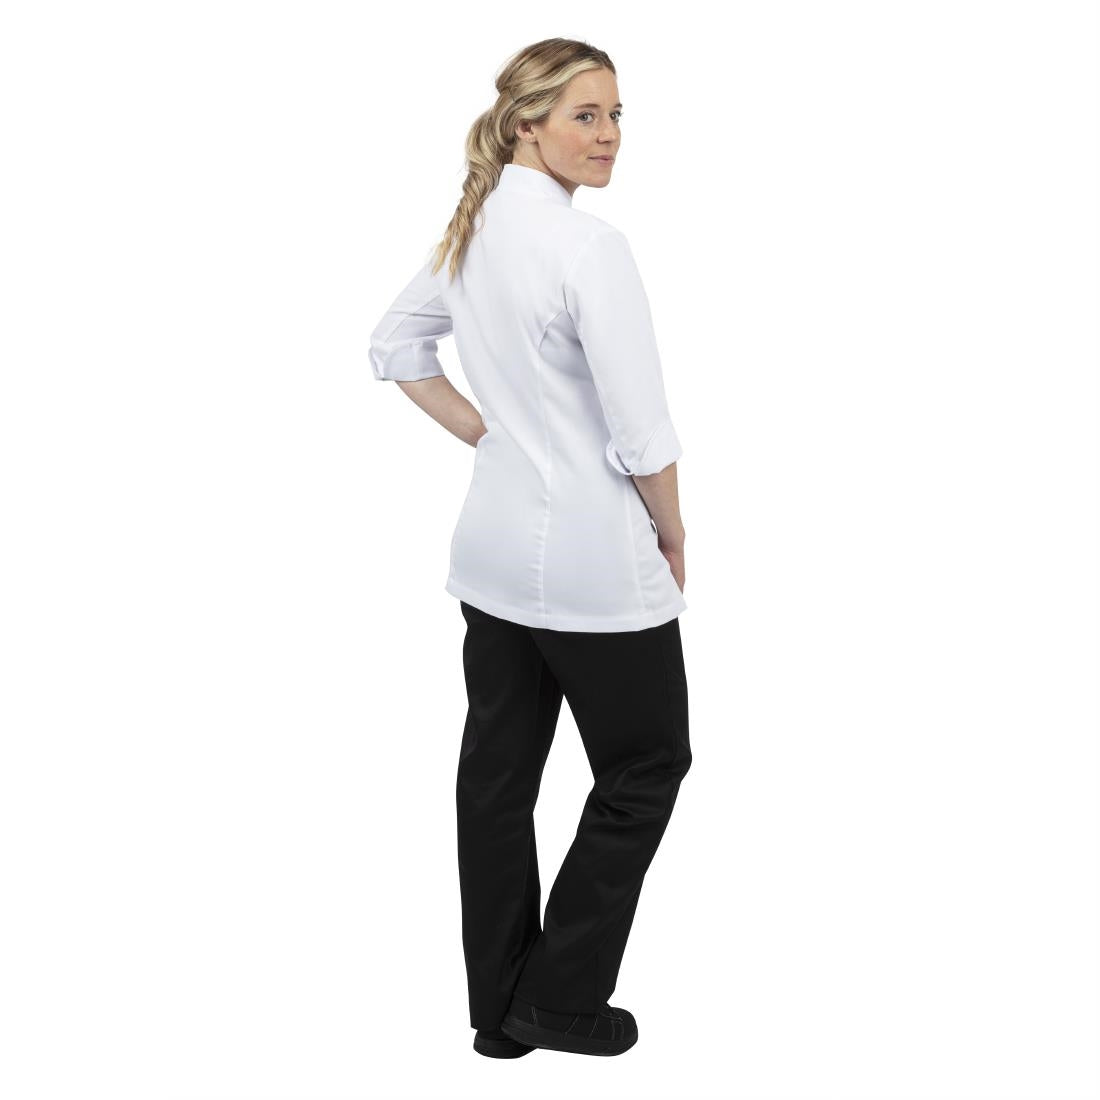 BB701-M Whites Ladies Fitted Jacket - Size M JD Catering Equipment Solutions Ltd